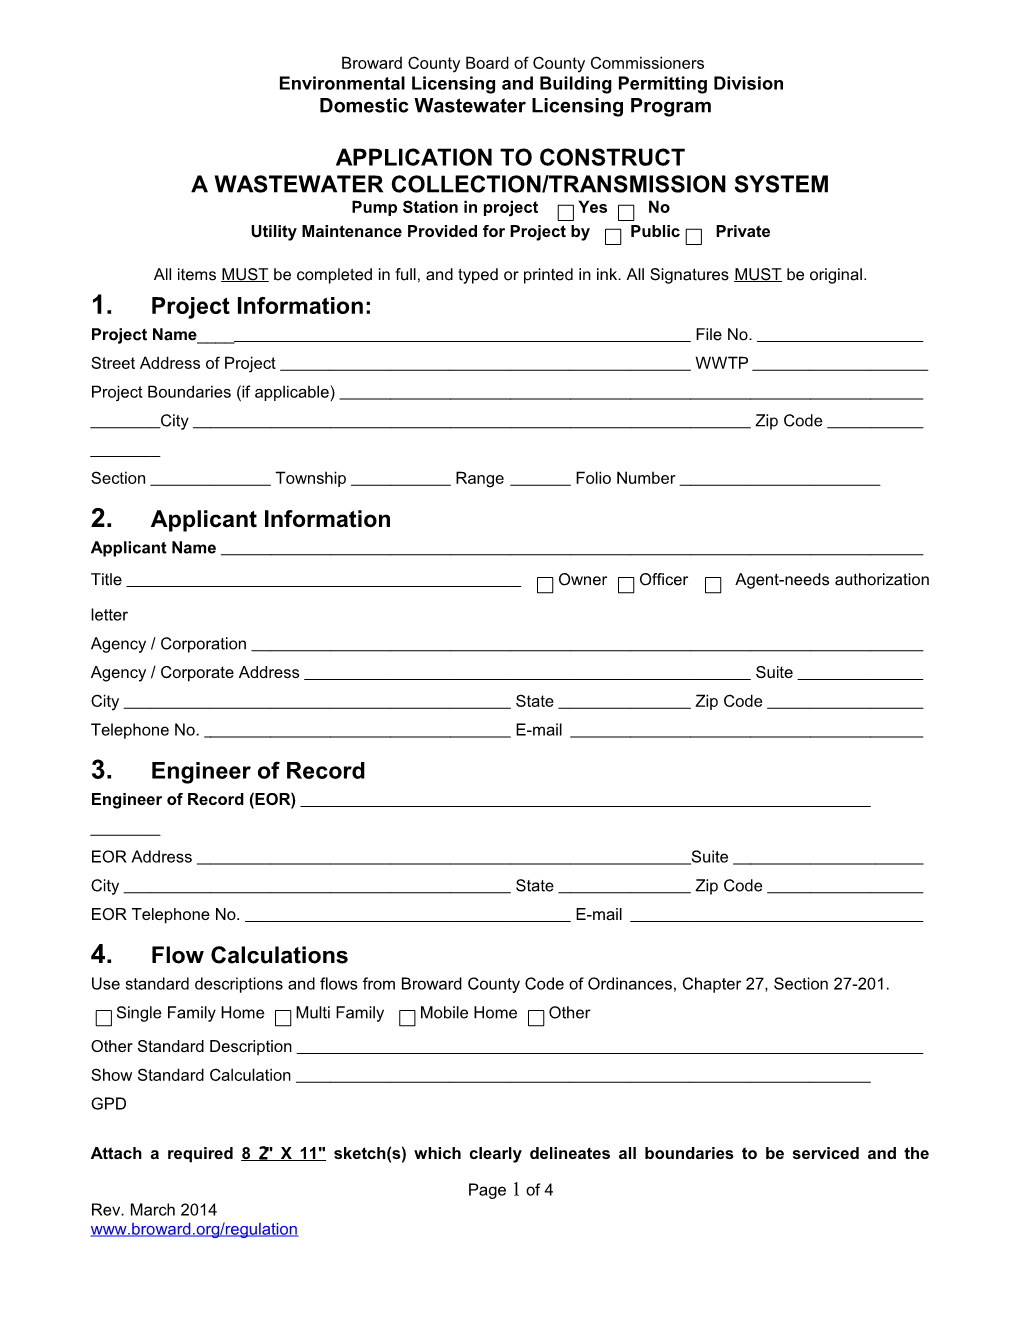 Application To Construct A Wastewater Collection/Transmission System